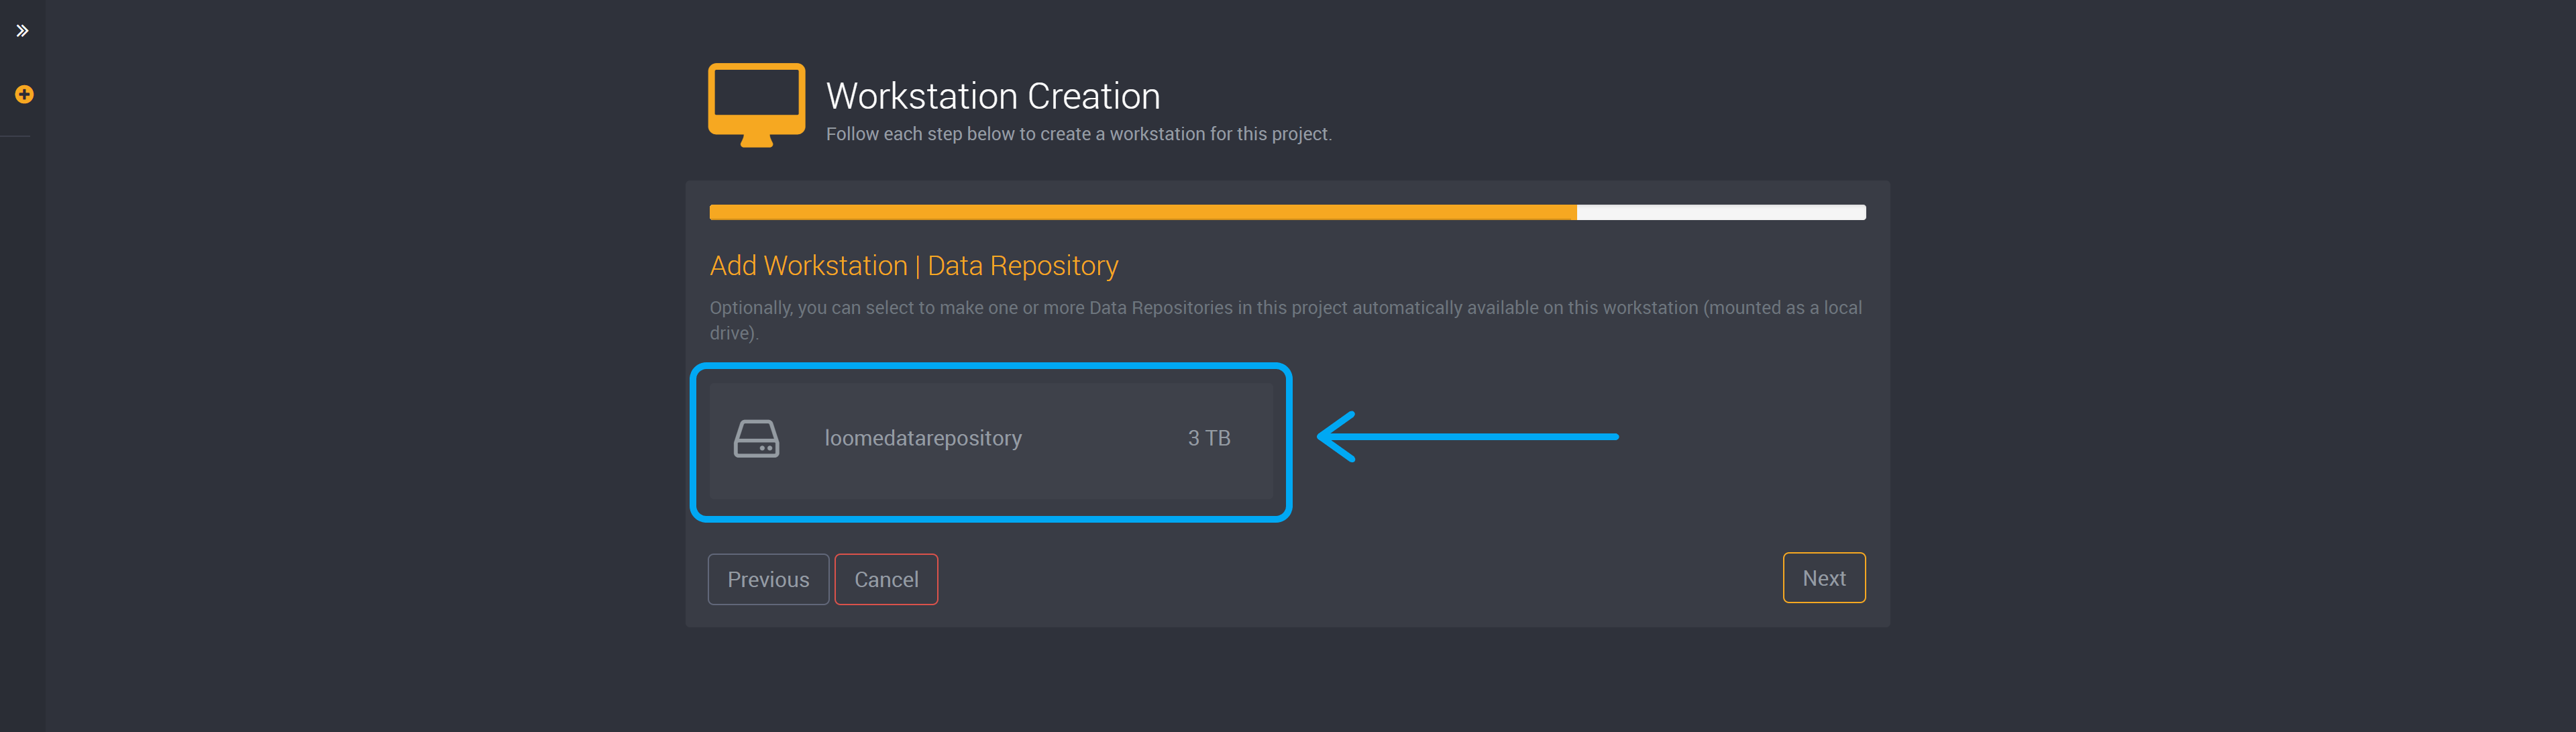 Select a data repository